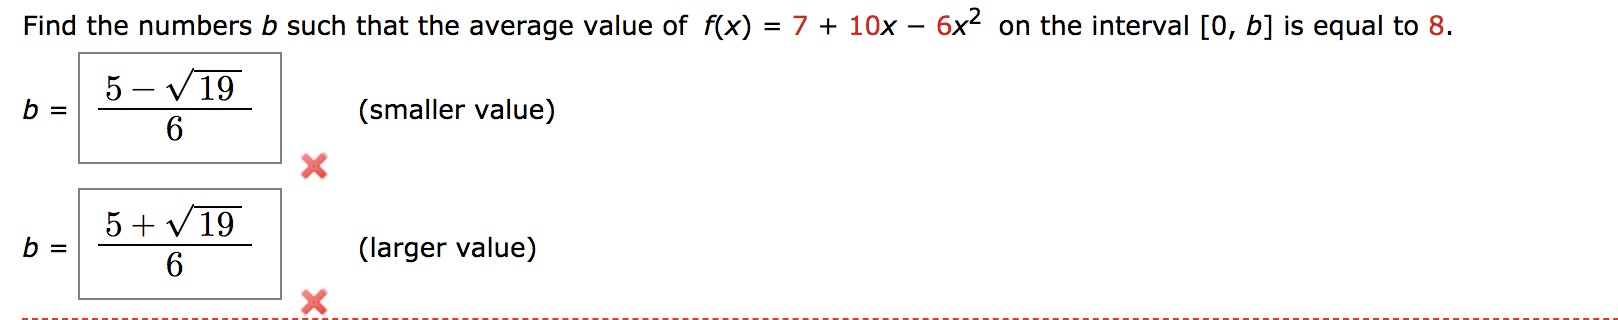 Find the numbers b such that the average value of f(x) = 7 + 10x – 6x on the interval [0, b] is equal to 8.
5 – V 19
b =
(smaller value)
5 + V19
b =
(larger value)
